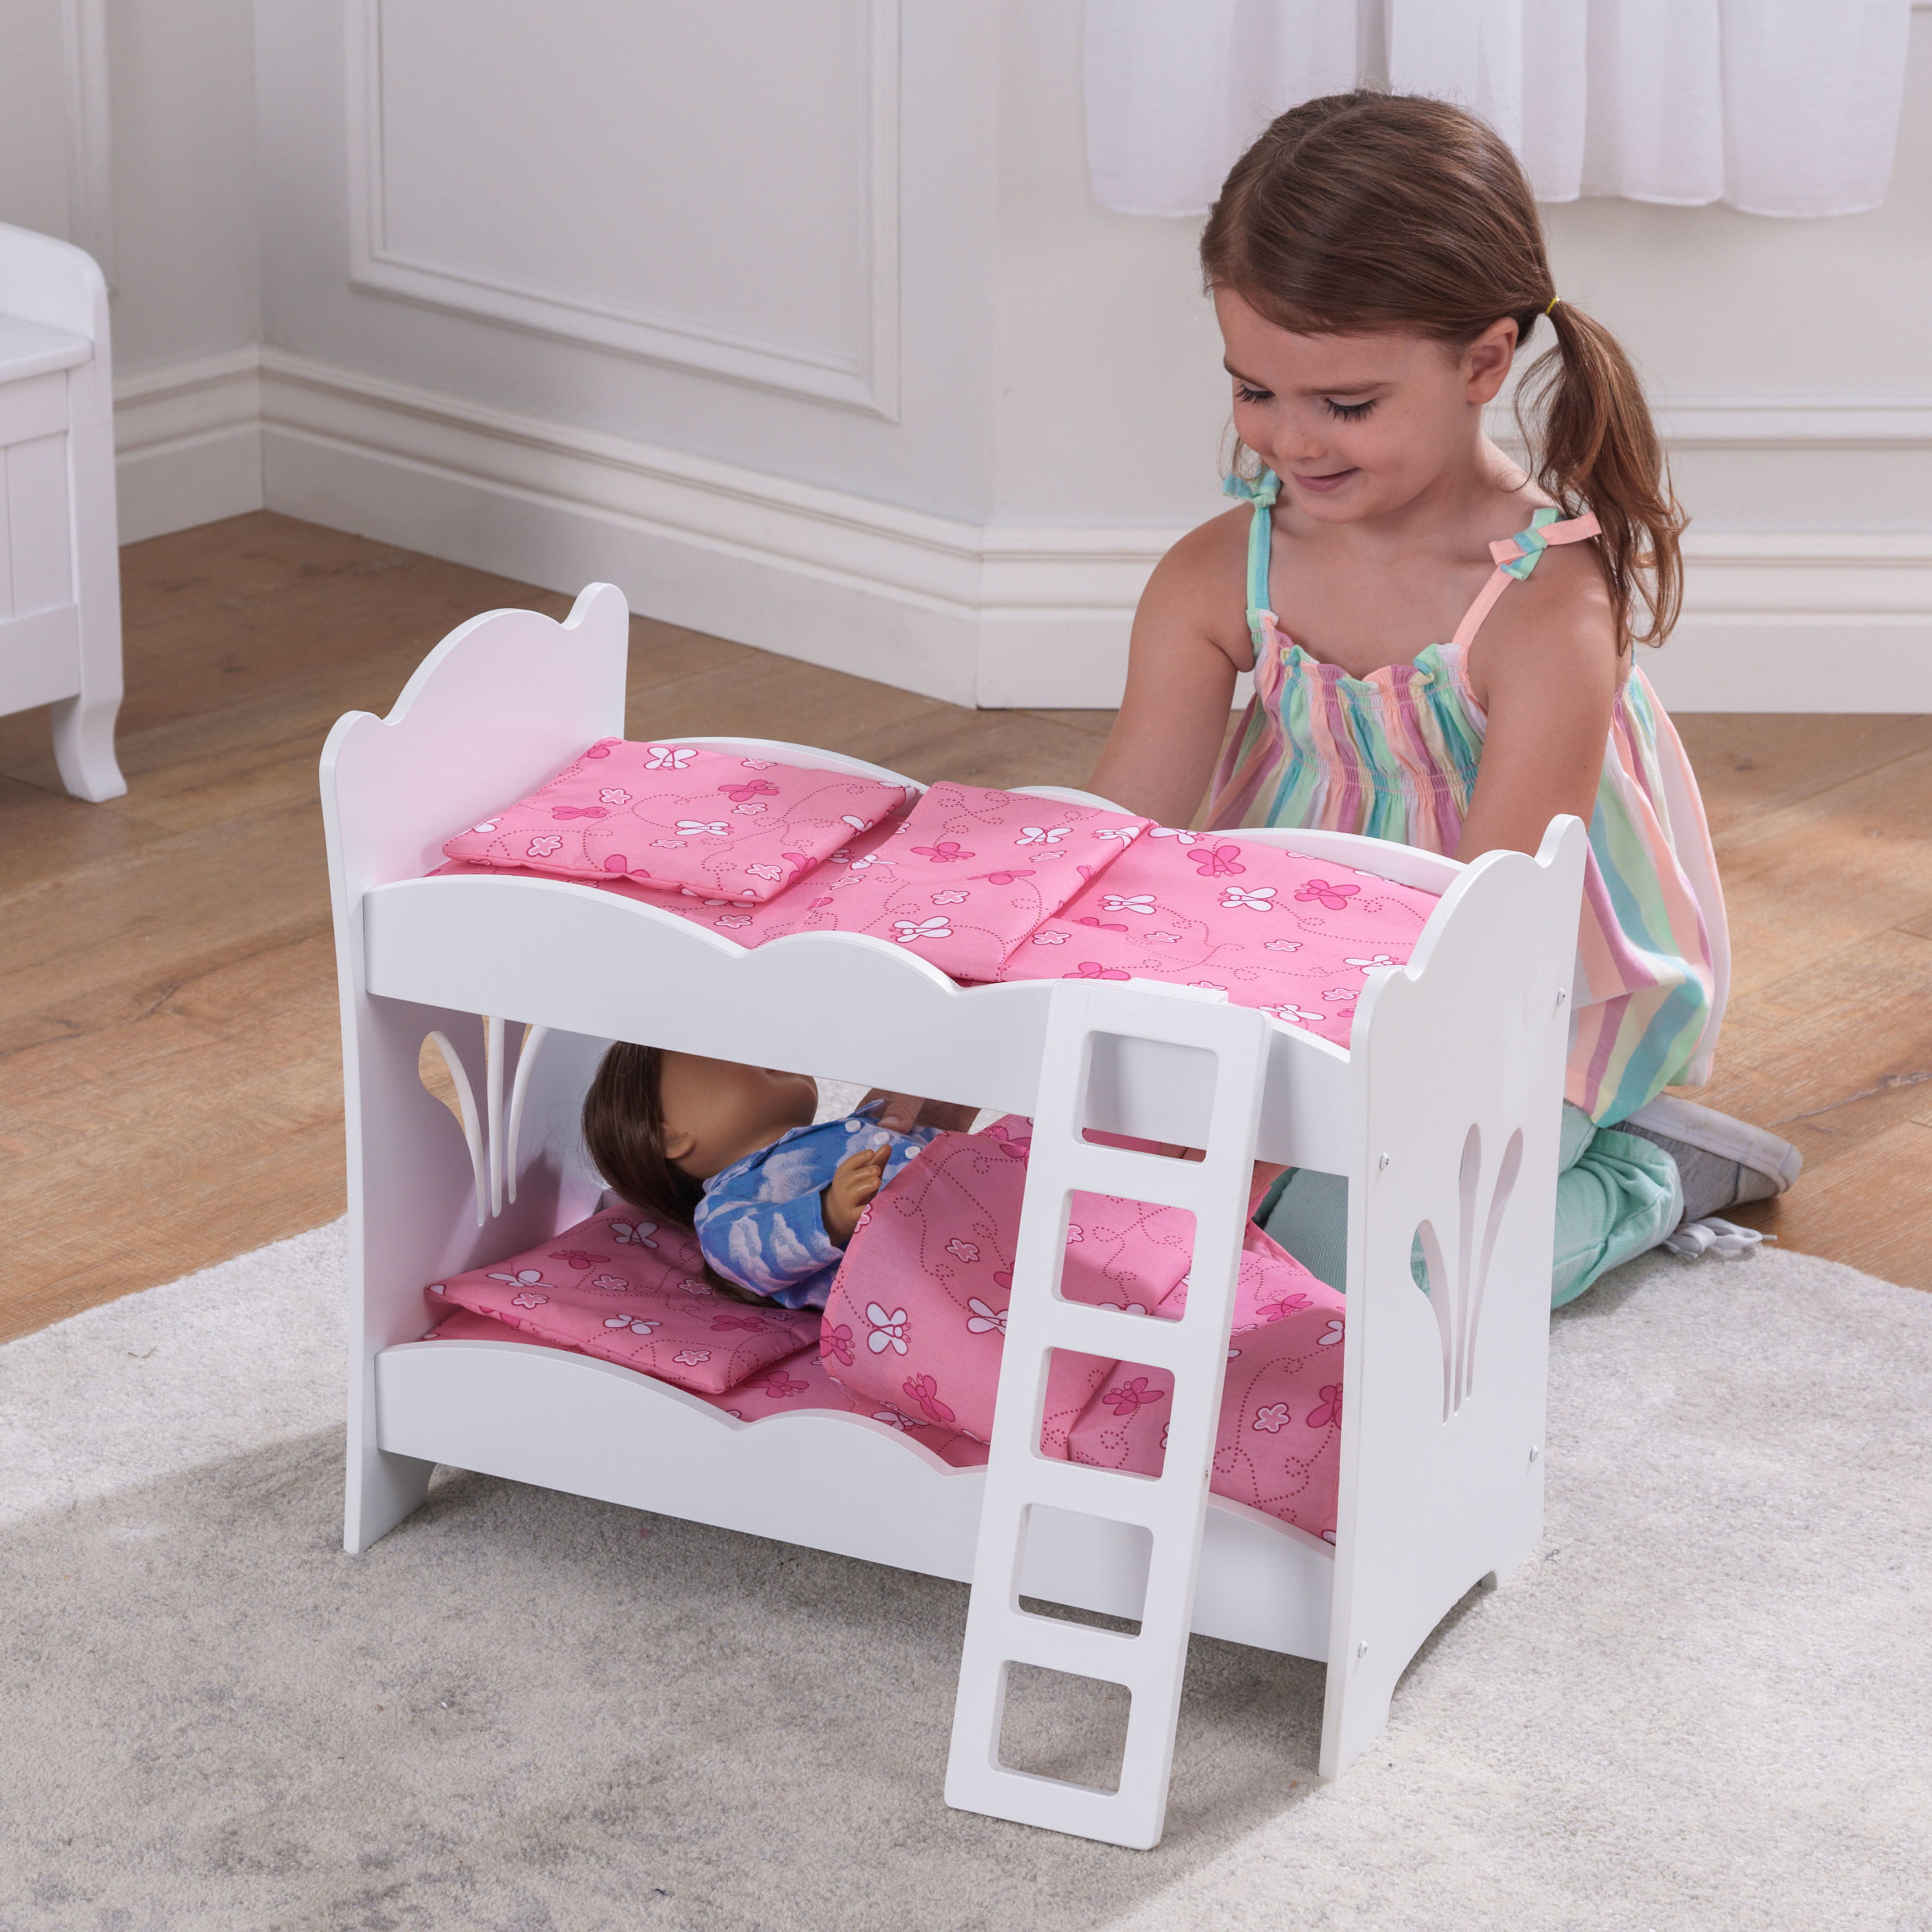 NEW WOODEN BUNK BED COT CRIB DOLLS TOY WITH BEDDING SET SALE 20%OFF 